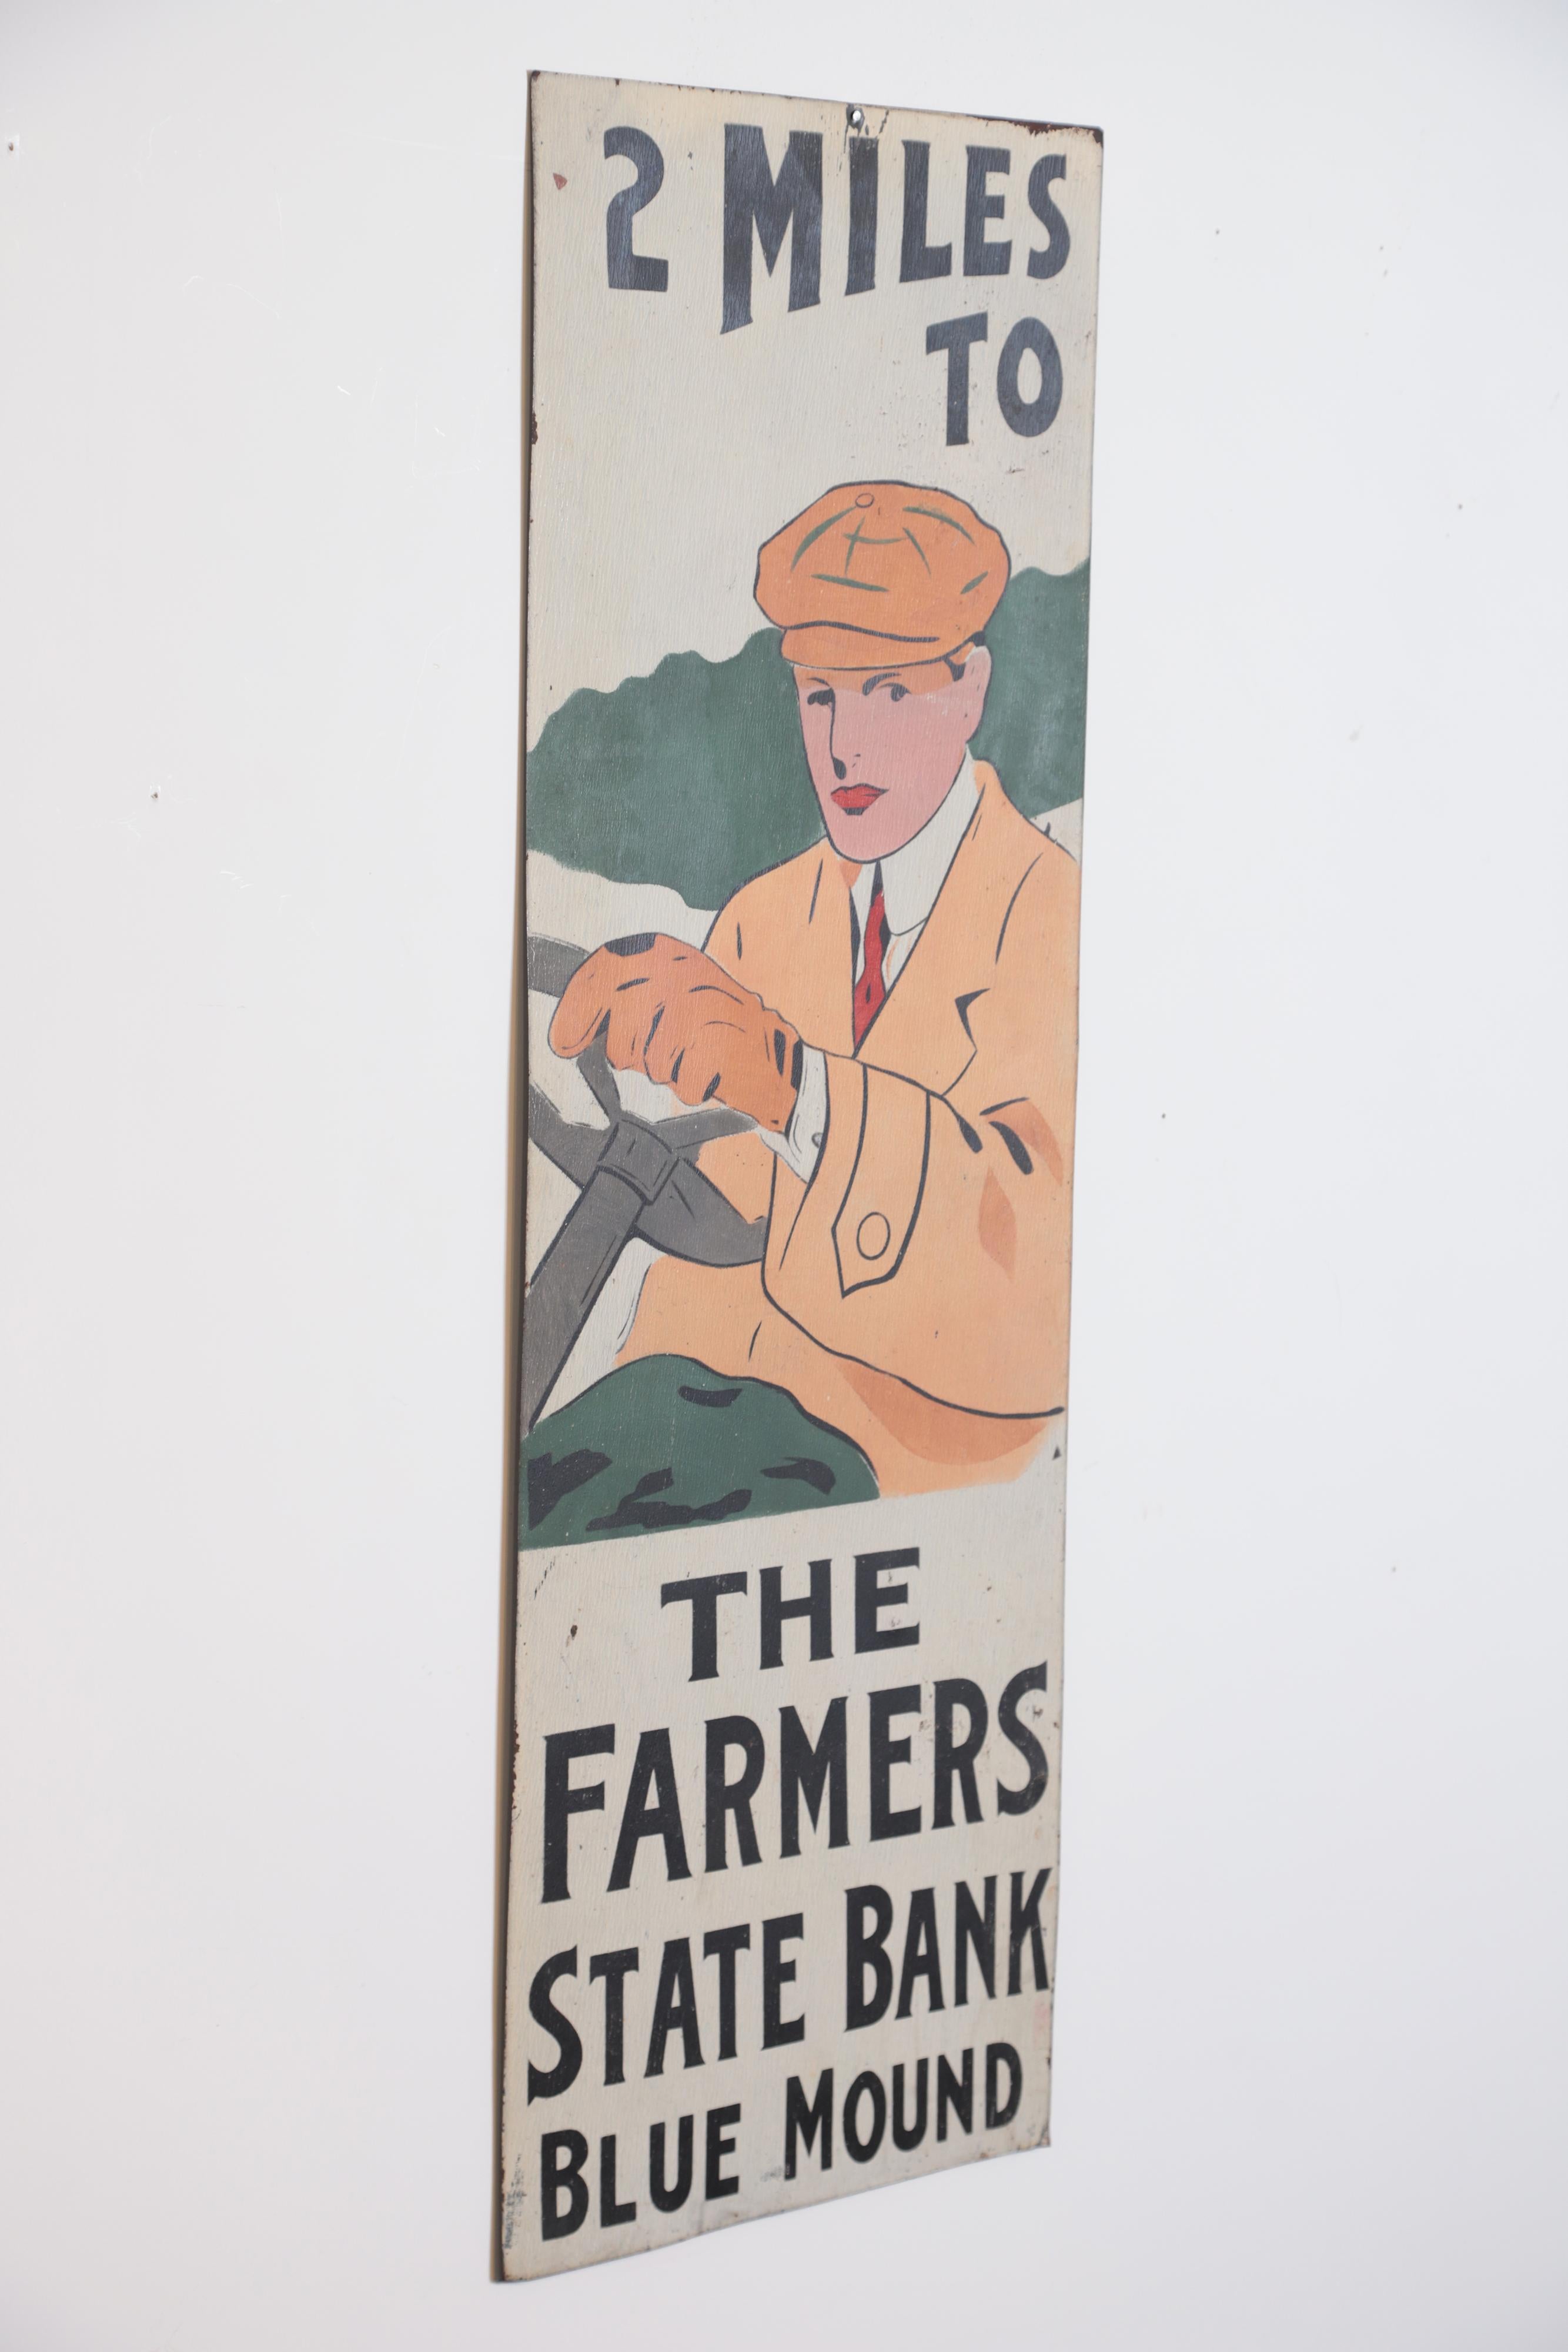 Art Deco Automobilia Farmers State Bank Tin advertising sign

Kansas road-sign advertising for FSB. 
Not unlike the Burma Shave series of signs every few miles on the Highway, with varying miles to go.

Two-mile version, for the Blue Mound main